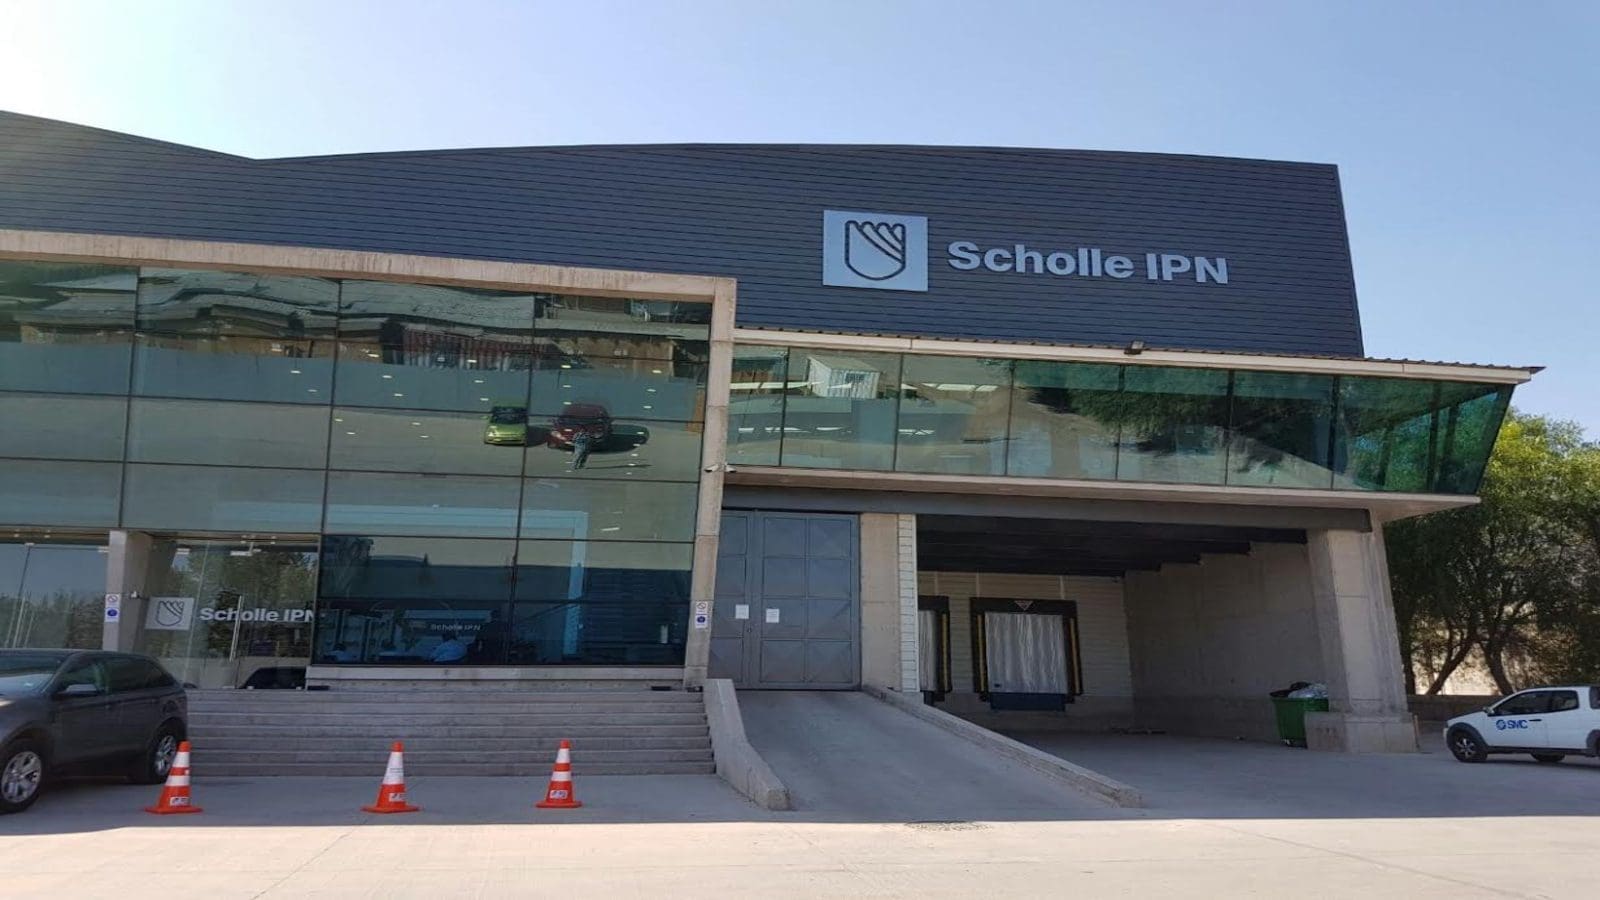 SIG bolsters sustainable packaging capabilities with US$1.53B acquisition of Scholle IPN  